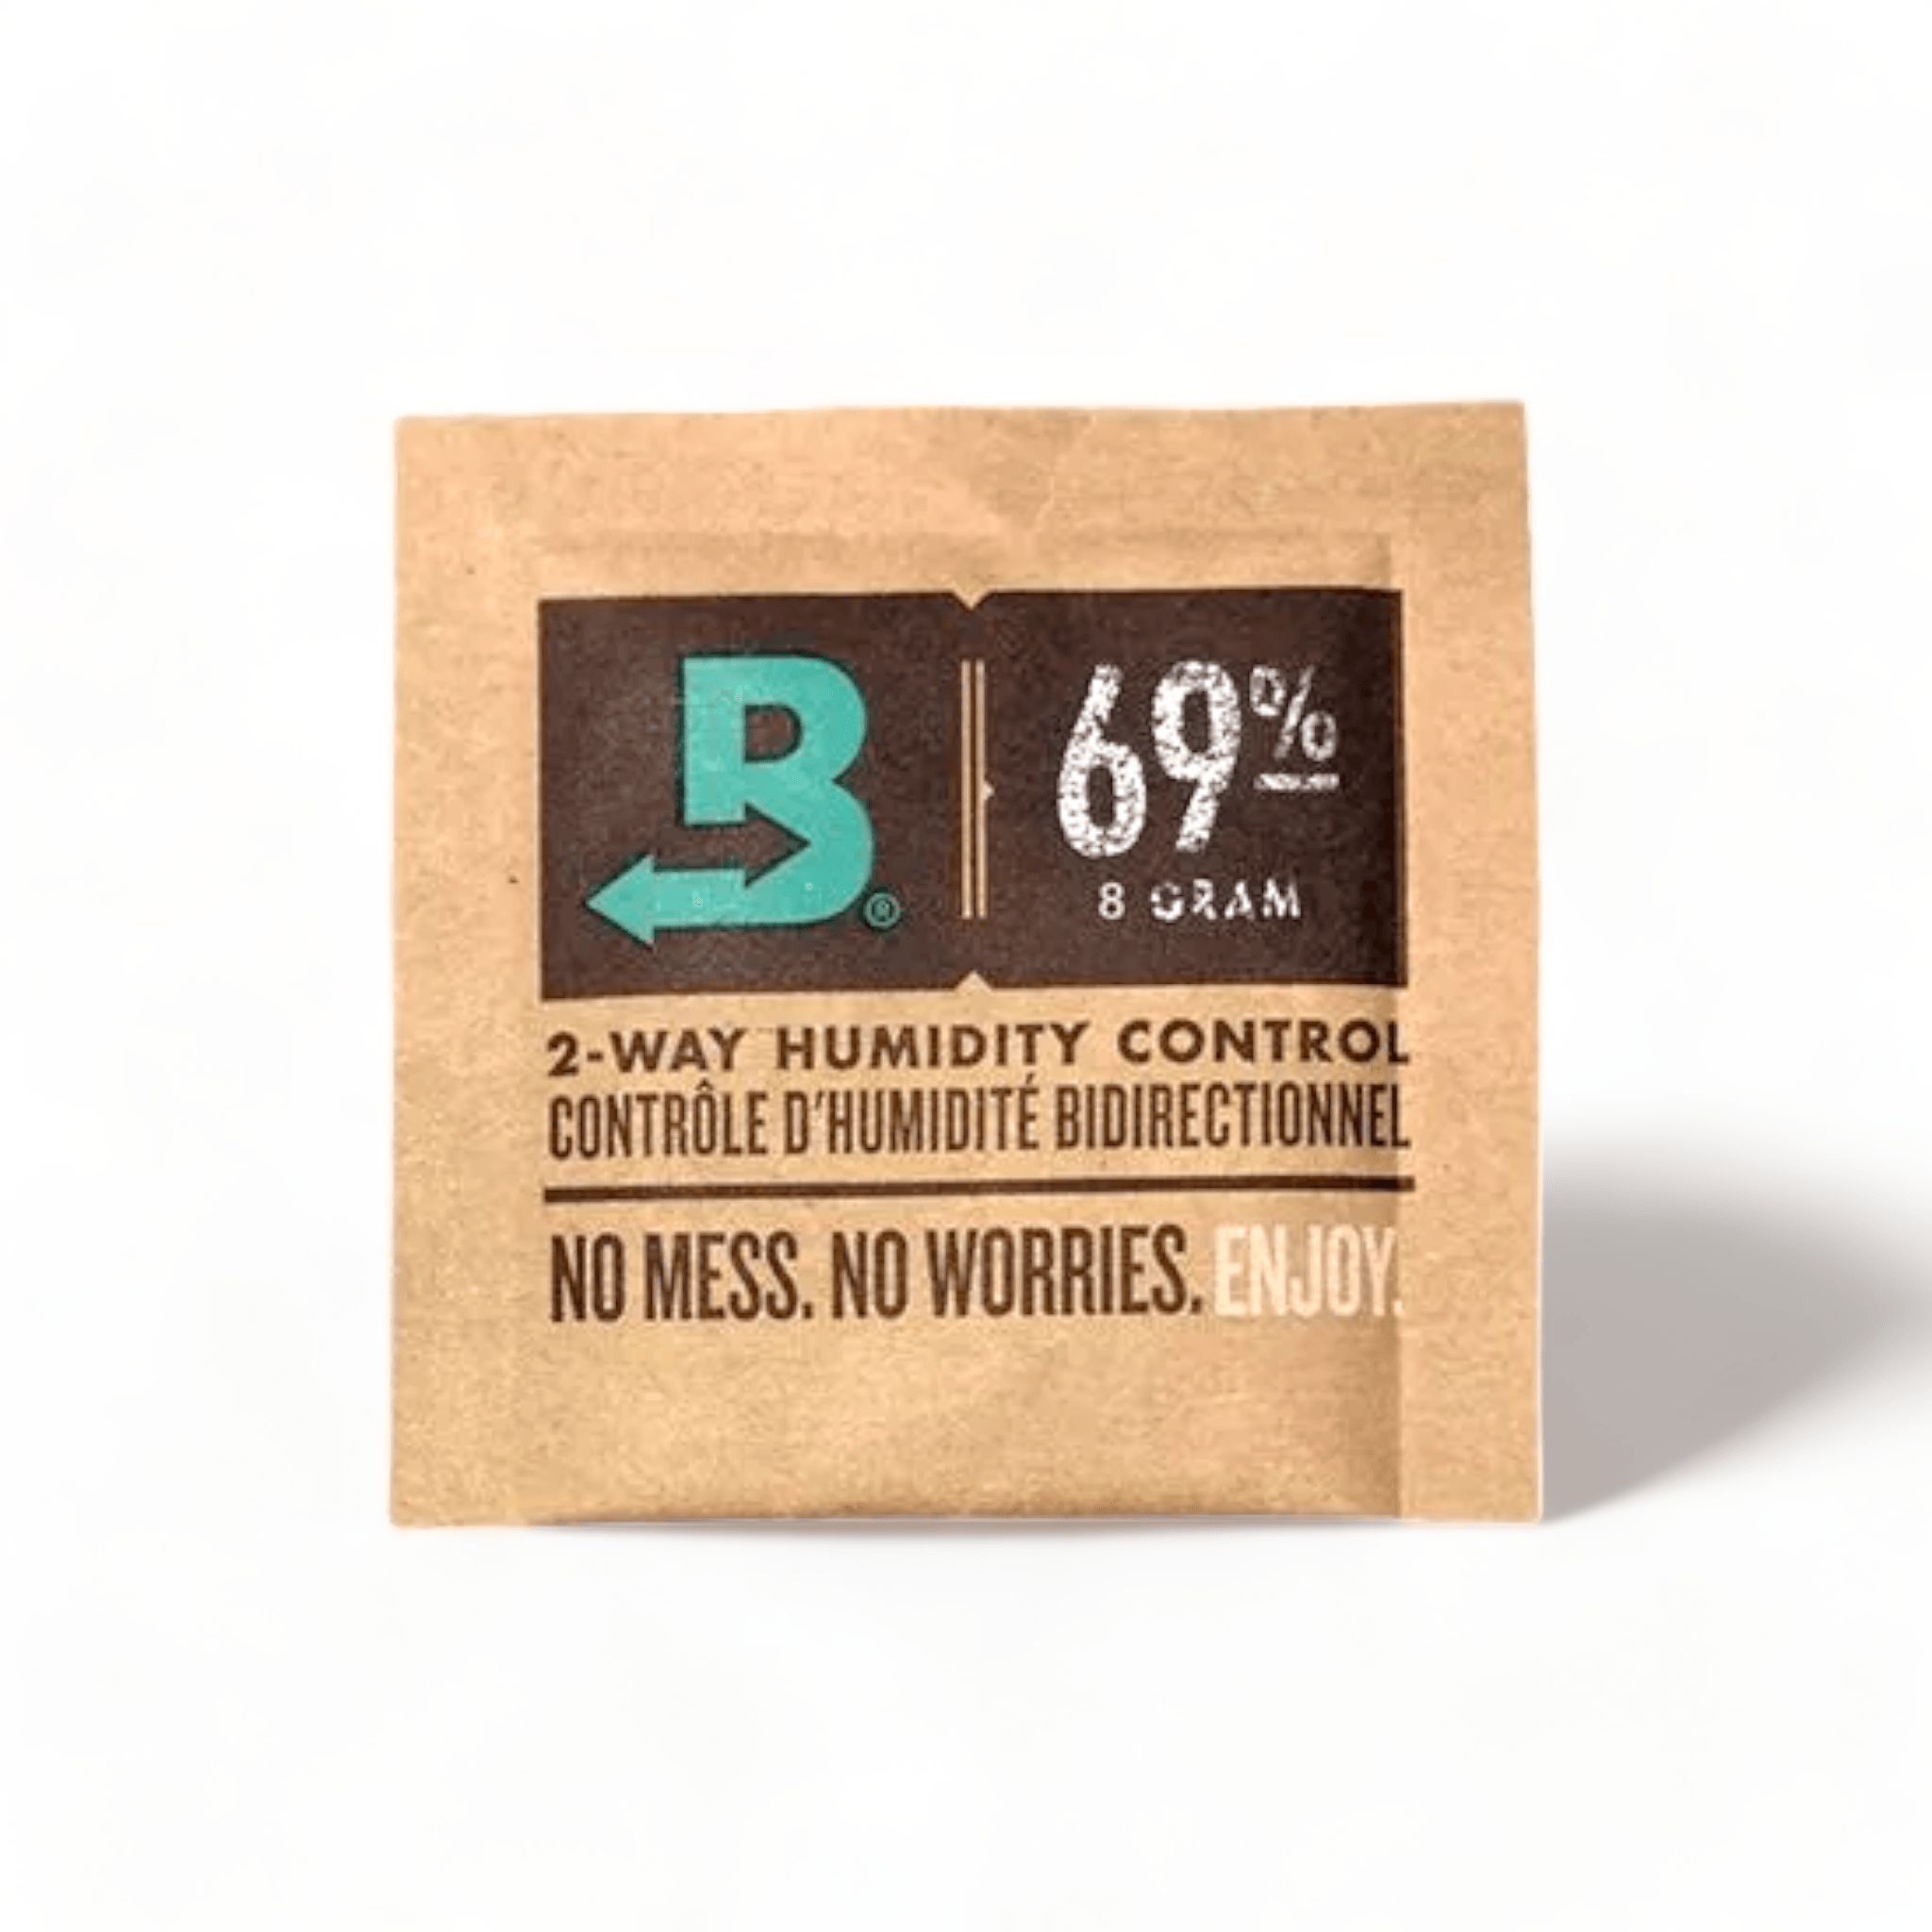 Boveda Accessories | Humidity Pack 69% 8 grams | 100pc - hk.cohcigars